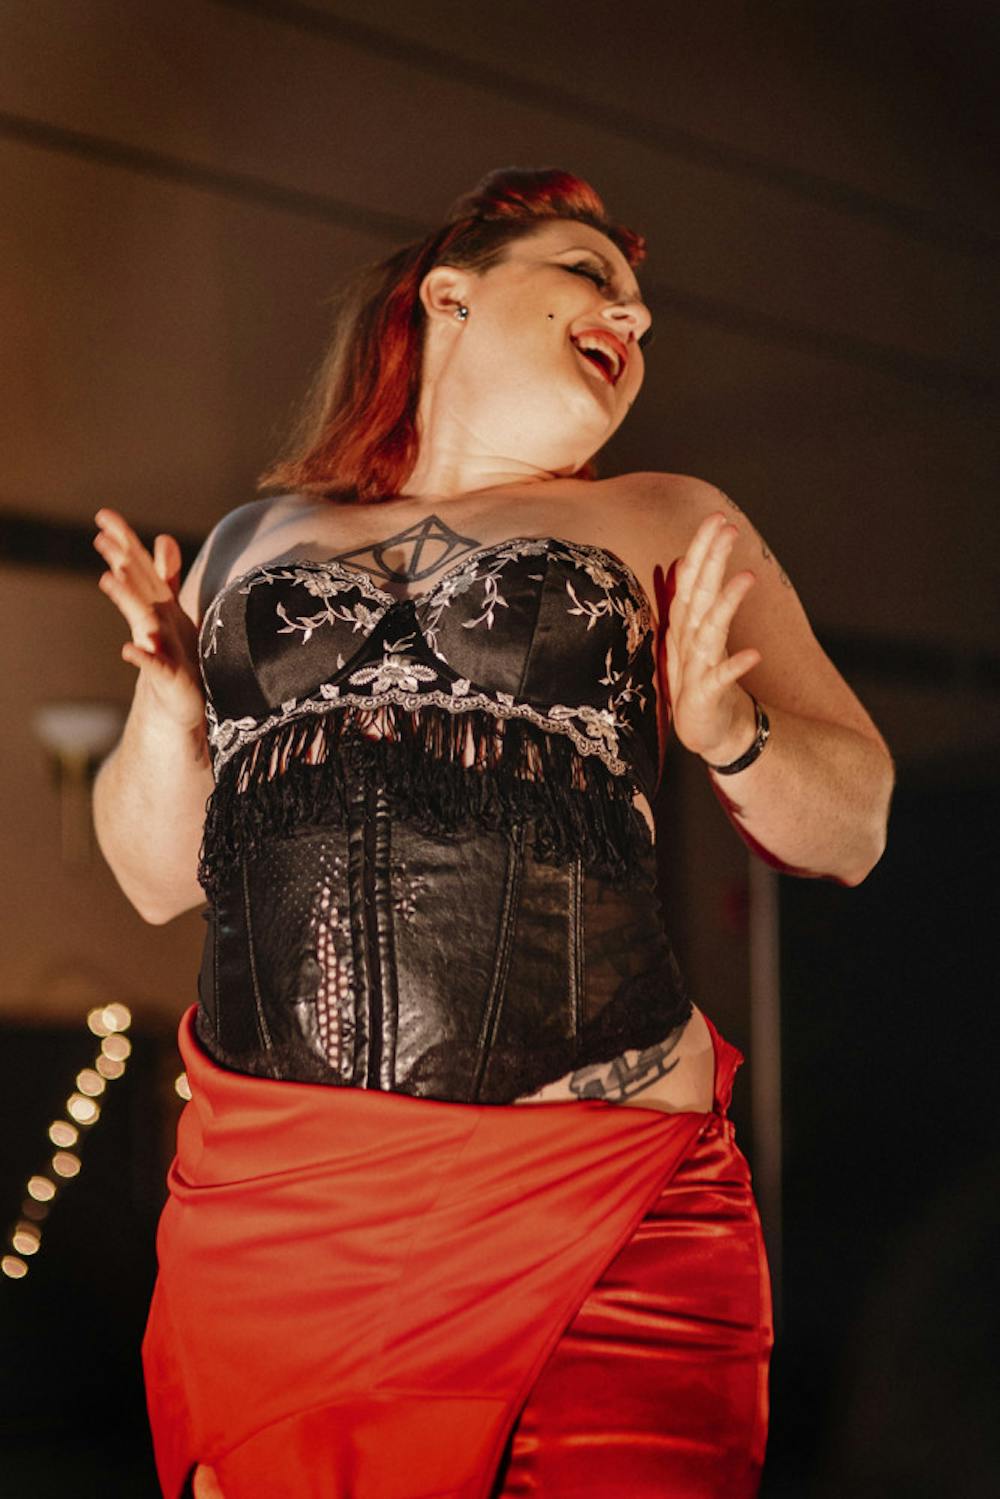 <p>Burlesque dancer Kitty La Tuch performs a sultry routine to “Feeling Good” by Michael Buble during Pride Student Union’s Drag Ball on Oct. 16, 2015. La Tuch was among five performers who lipsynced, sang and danced to current songs in the Reitz Union grand ballroom to celebrate ‘70s and ‘80s drag culture.</p>